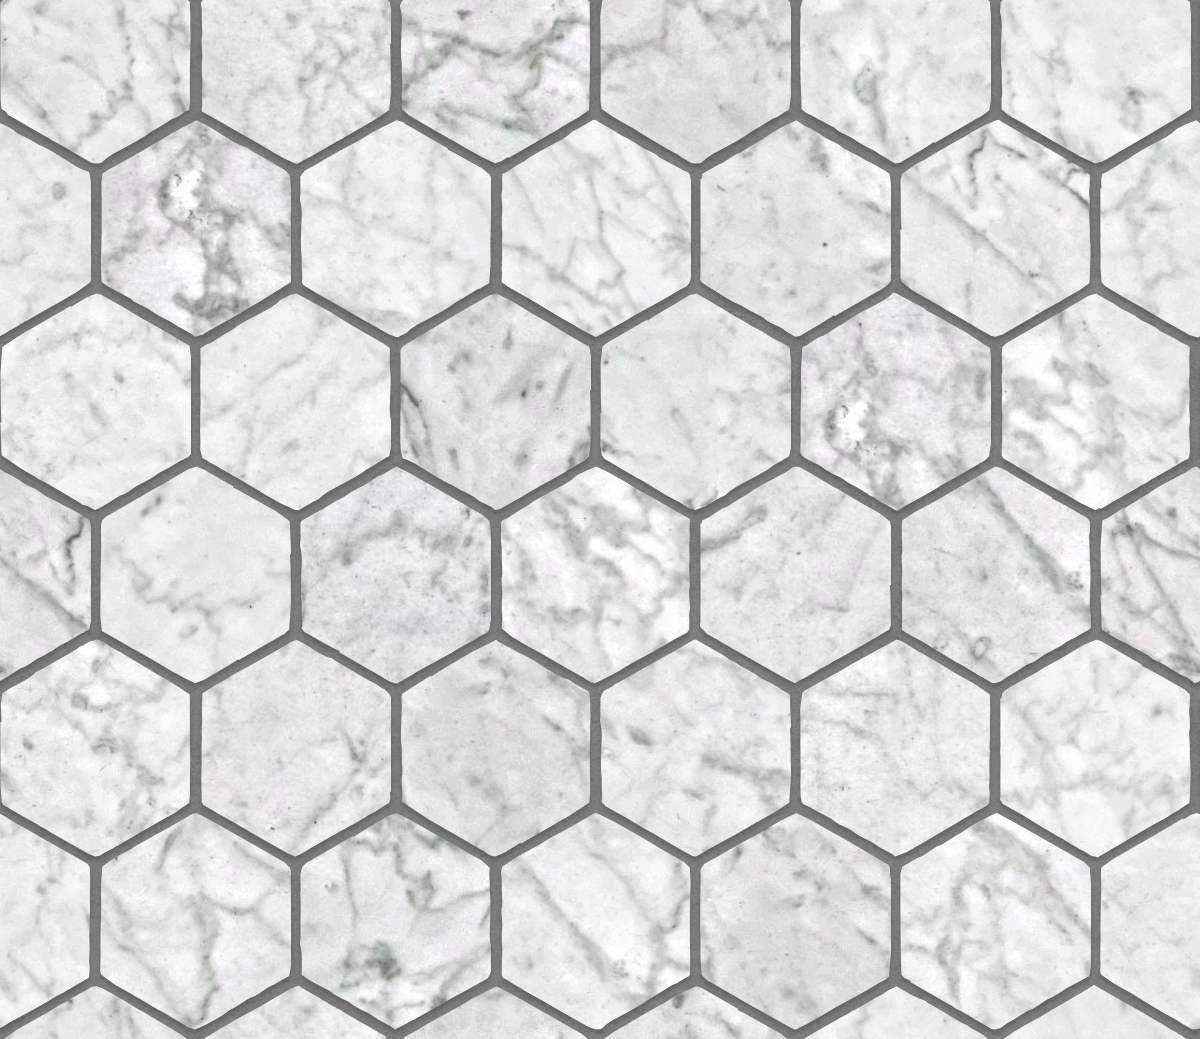 A seamless stone texture with white marble blocks arranged in a Hexagonal pattern